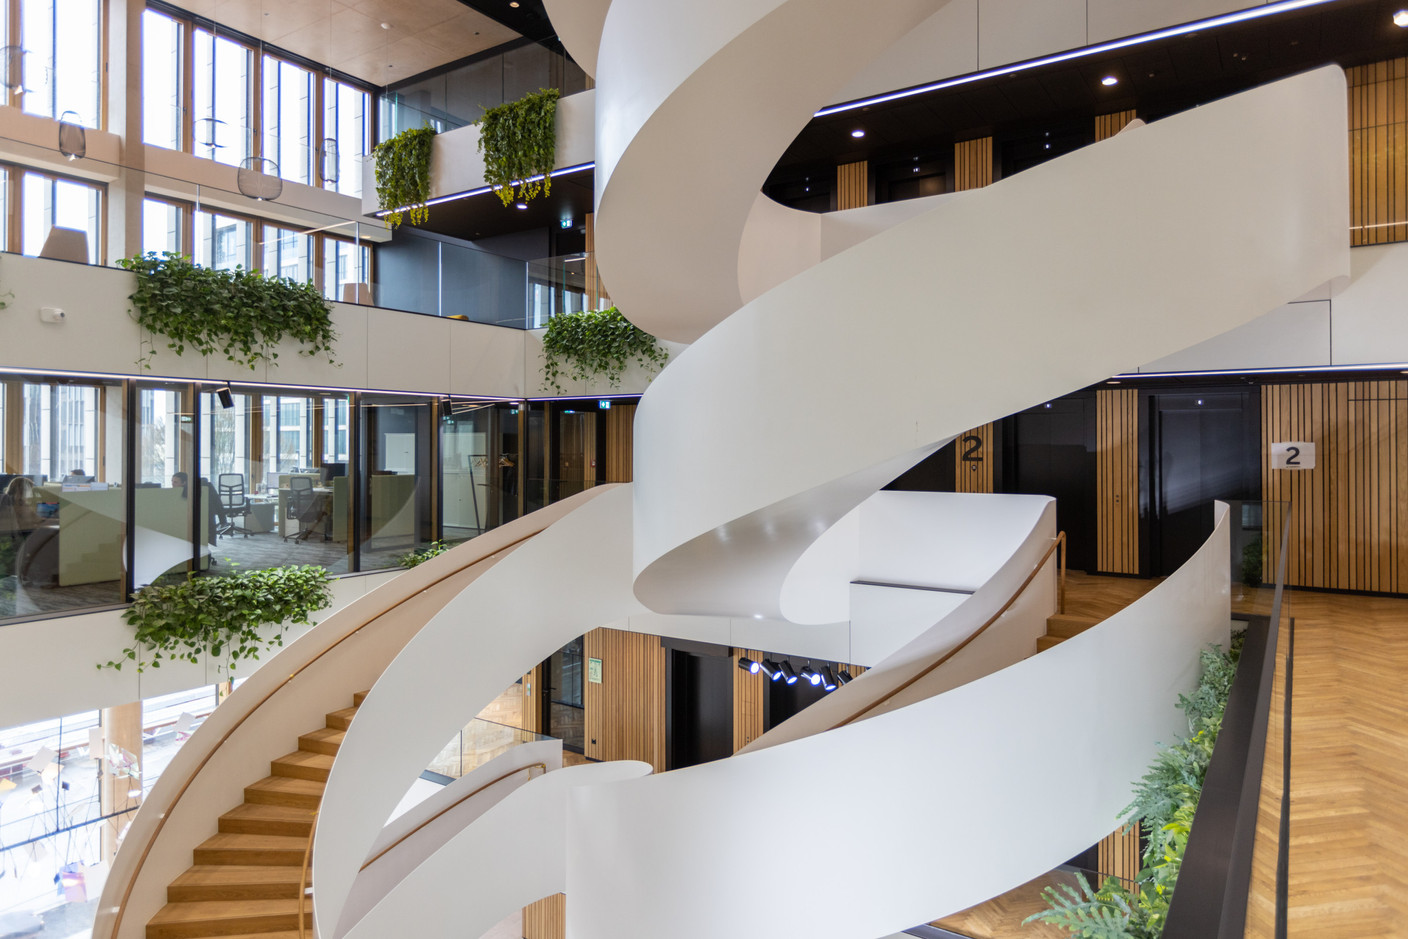 The vertical circulation axis occupies a central place in the atrium. Photo: Romain Gamba/Maison Moderne